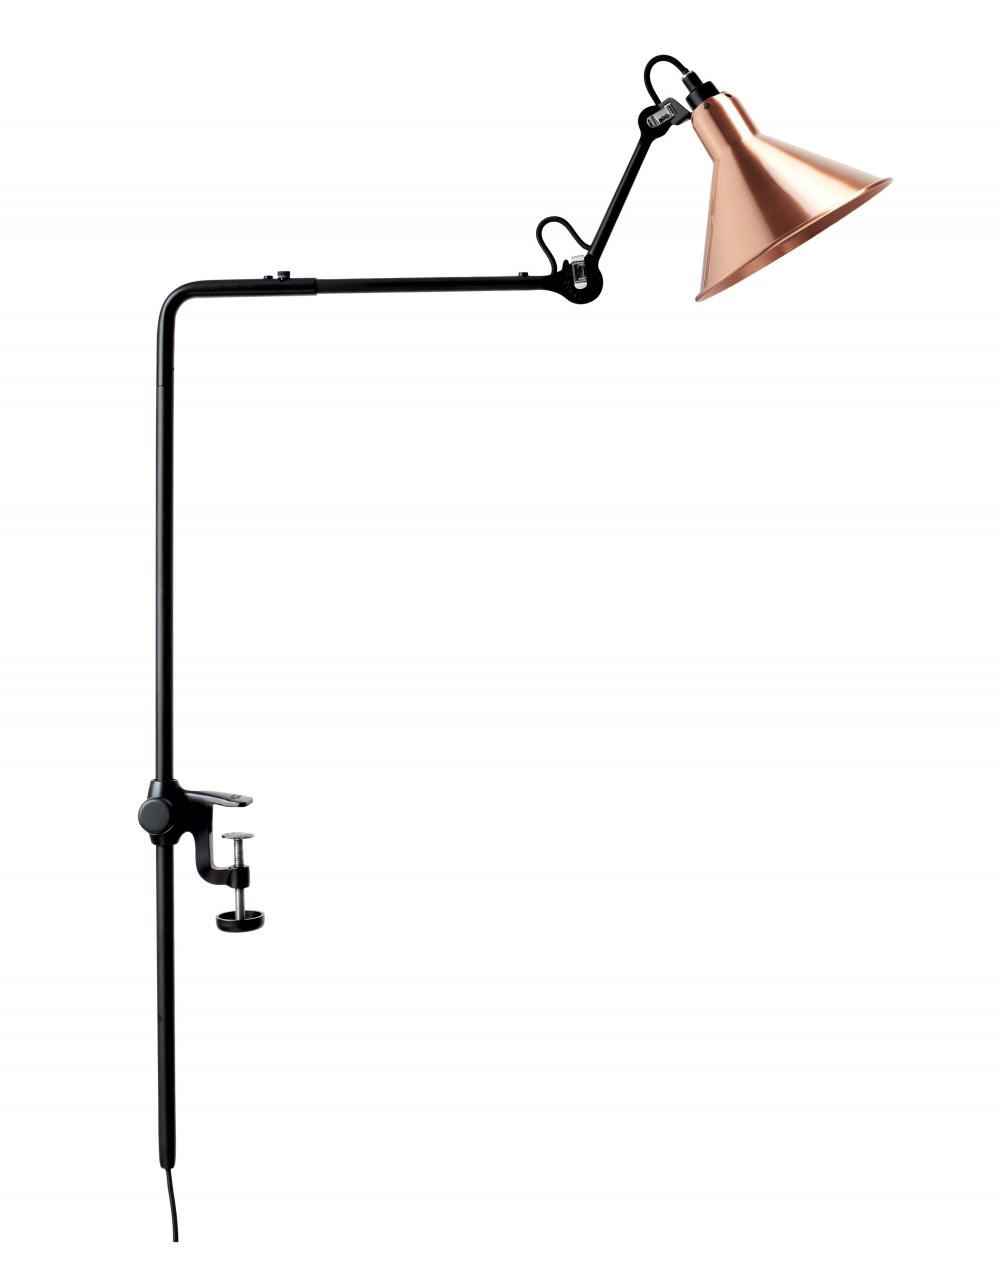 Lampe Gras 226 Bookshelf Lamp Copper Shade With White Interior Conical